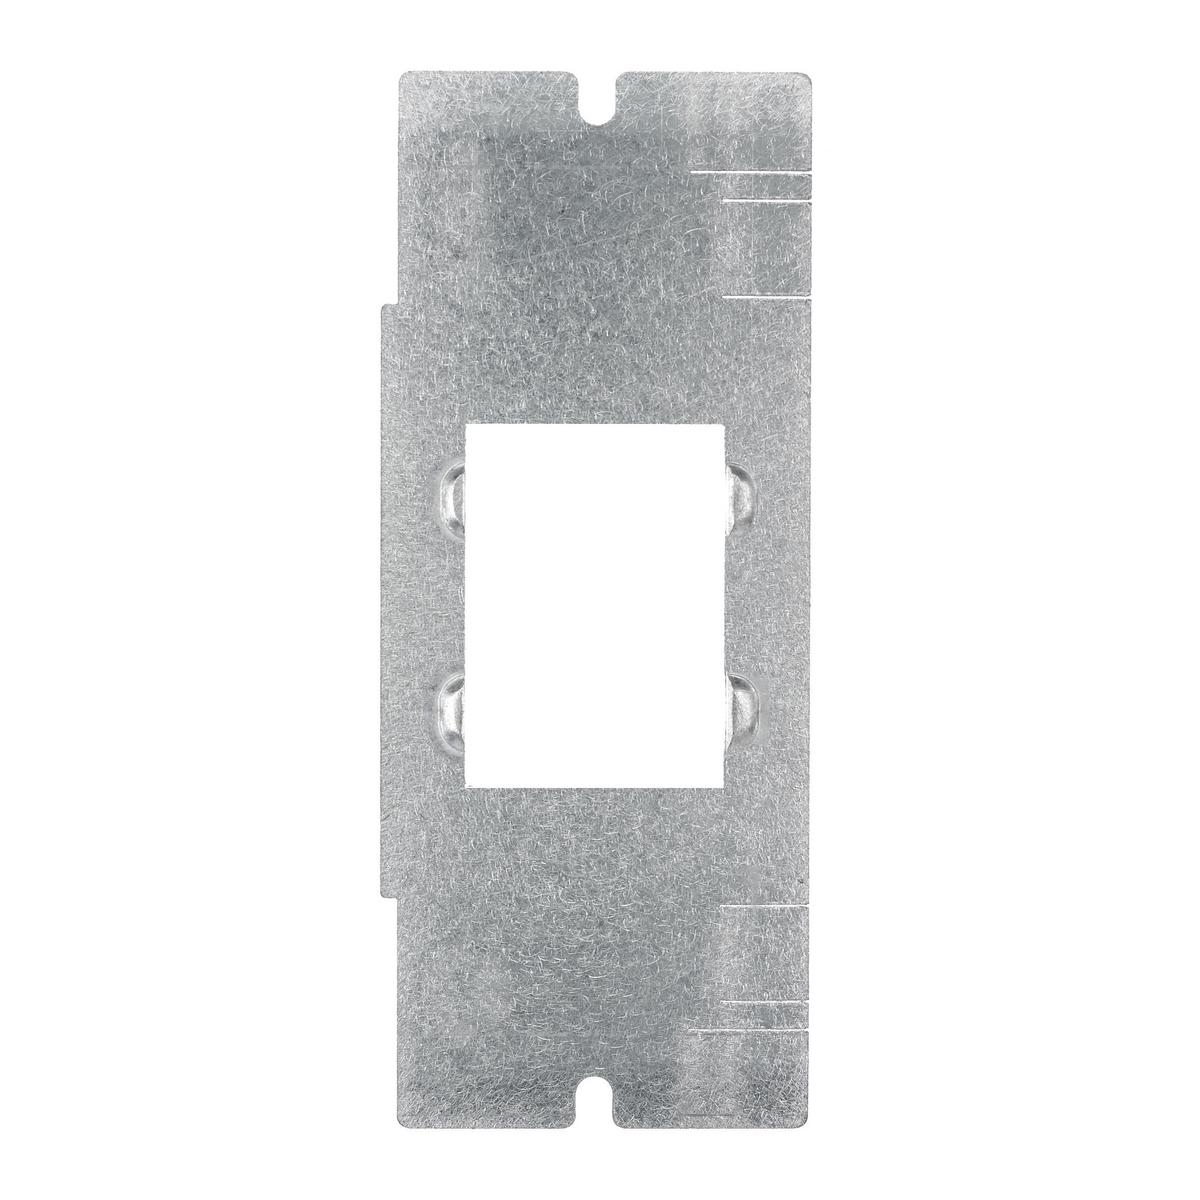 Hubbell FBMP15IM Concrete, Access, Wood Floorboxes, Recessed, 2, 4, & 6-Gang Series, Mounting Plate, 1-Gang, (1) 1.5 Unit Hubbell iStation Opening  ; Plate for Use in SystemOne 2, 4 & 6-Gang Recessed Floorboxes ; 1-Gang- (1) 1.5 Unit Hubbell iStation Opening ; Horizontial